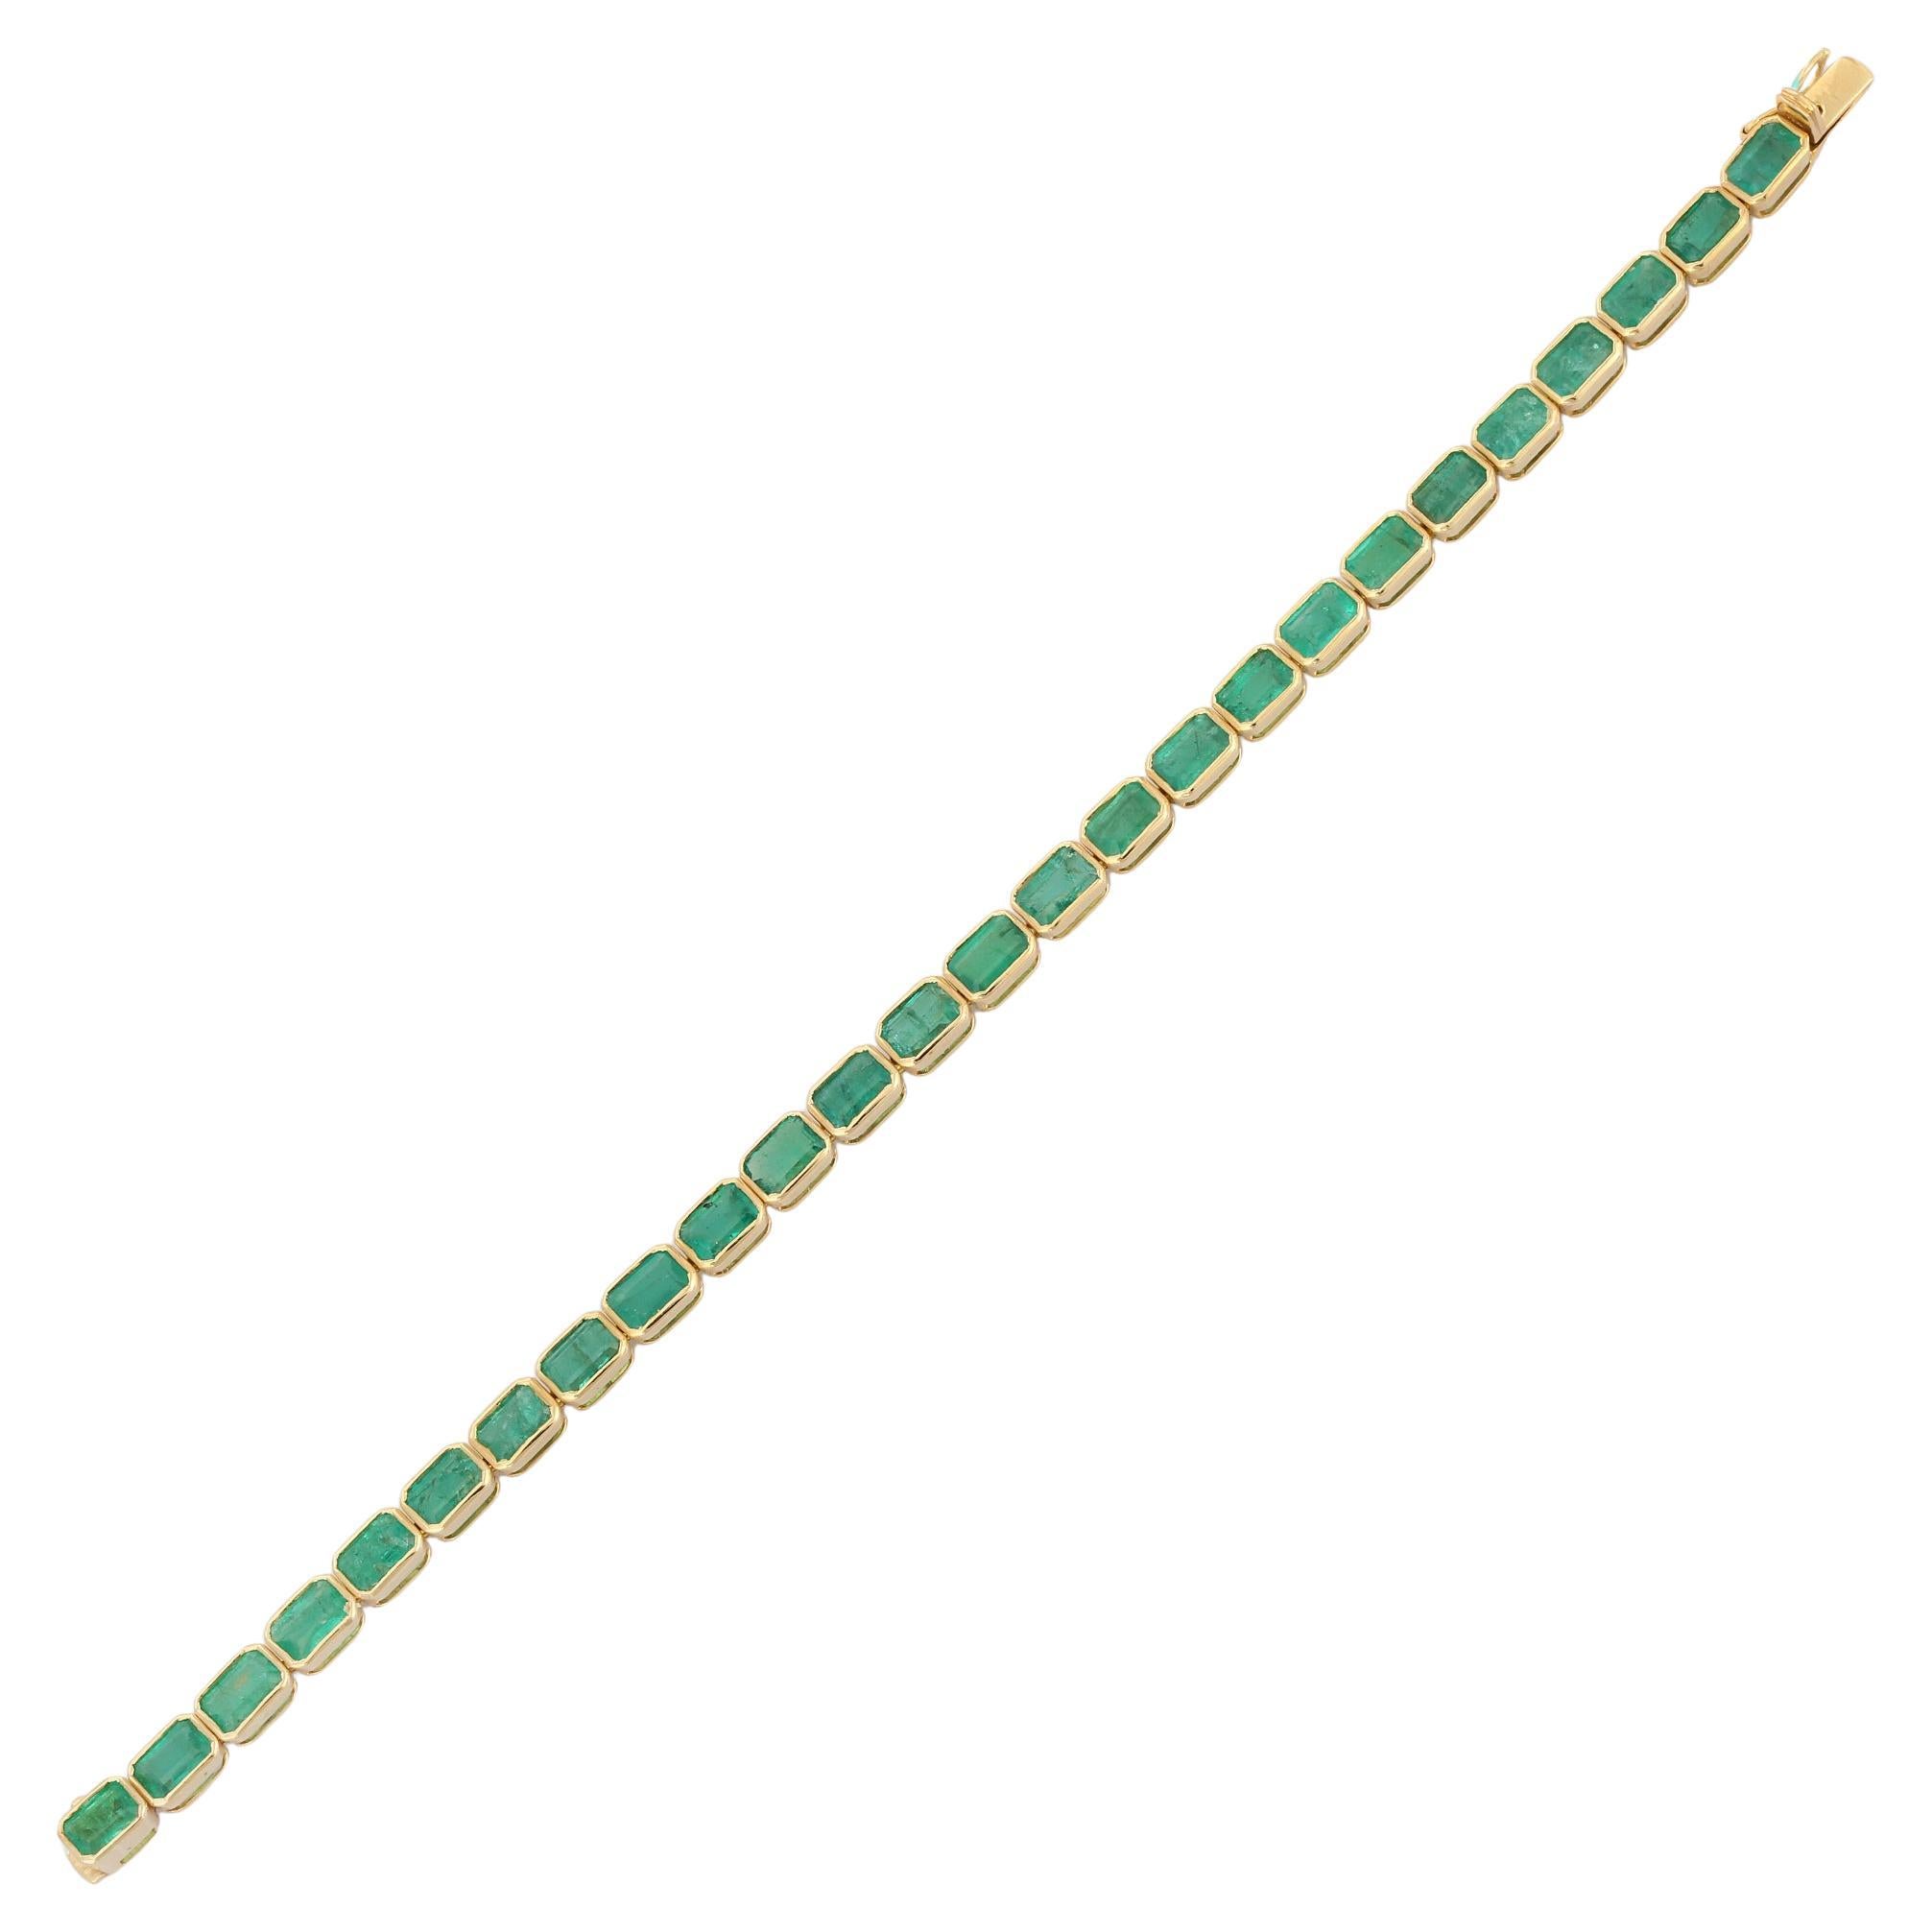 Emerald bracelet in 18K Gold. It has a perfect octagon cut gemstone to make you stand out on any occasion or an event.
A tennis bracelet is an essential piece of jewelry when it comes to your wedding day. The sleek and elegant style complements the